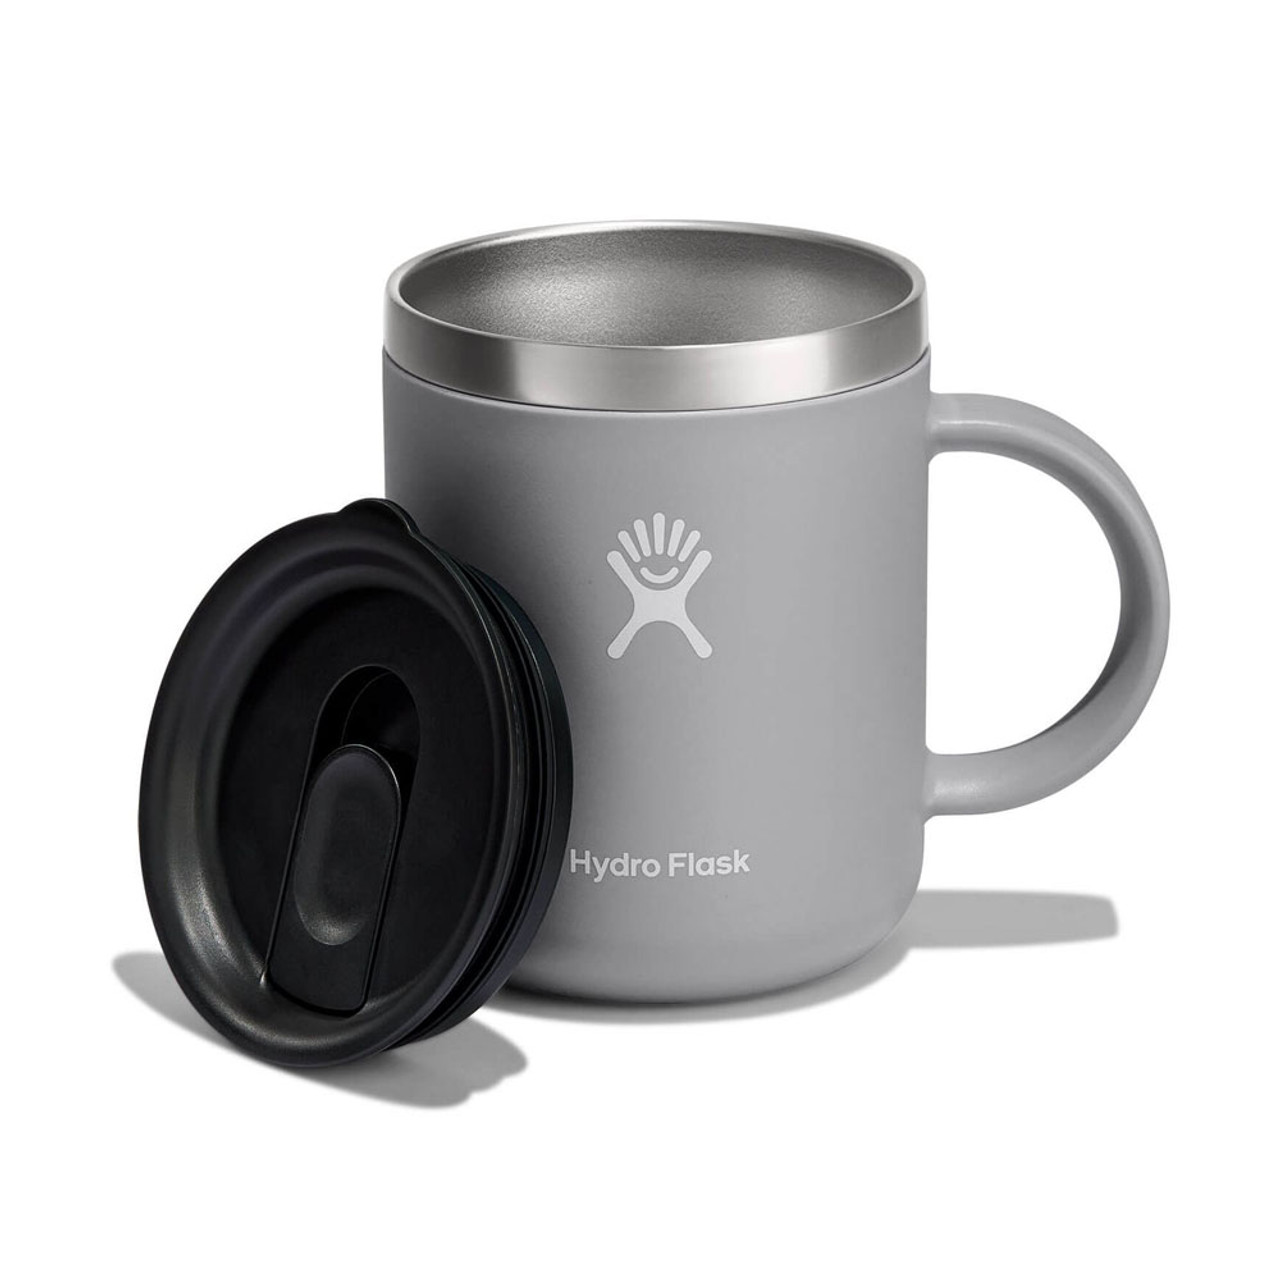 Hydro Flask Stainless Steel Coffee Mug Vacuum Insulated Pacific